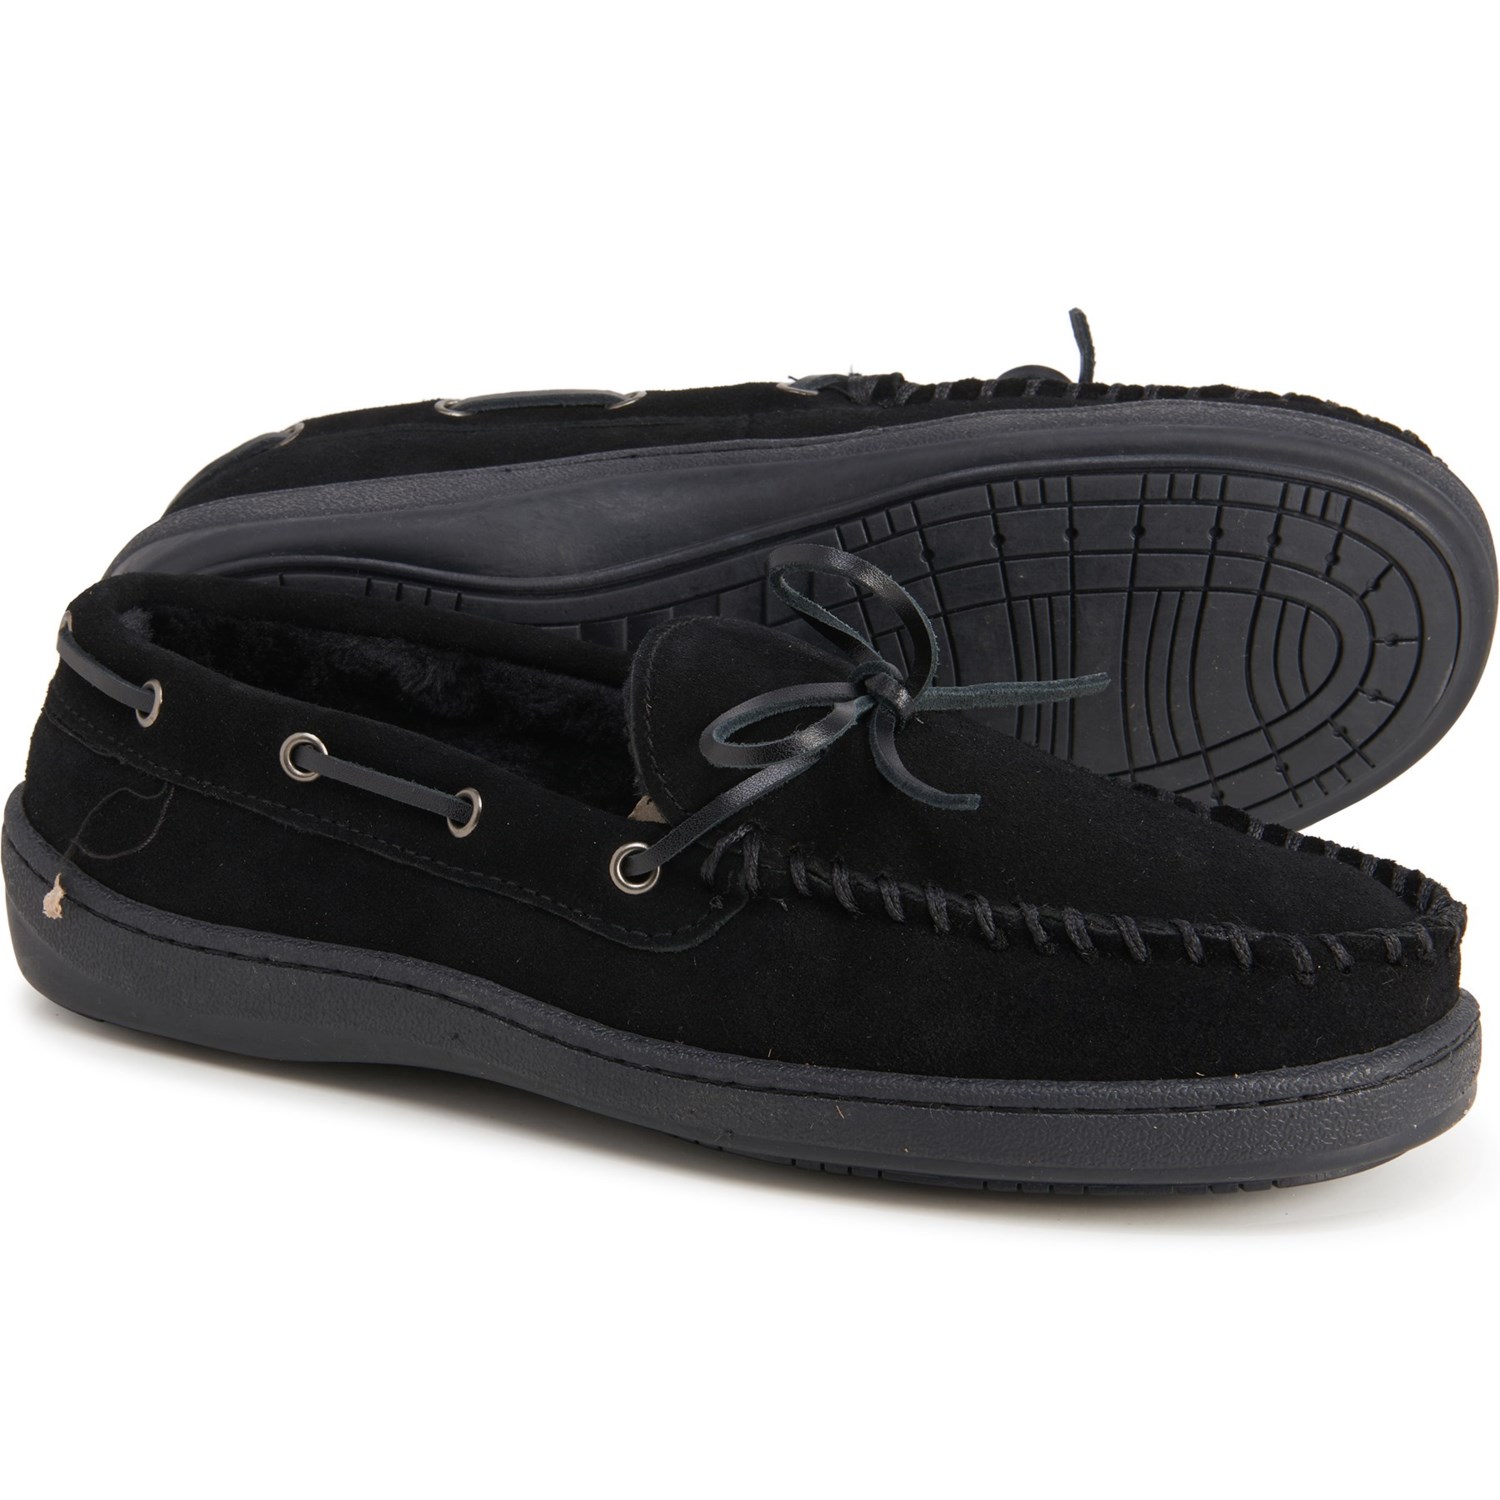 clarks moccasins slippers